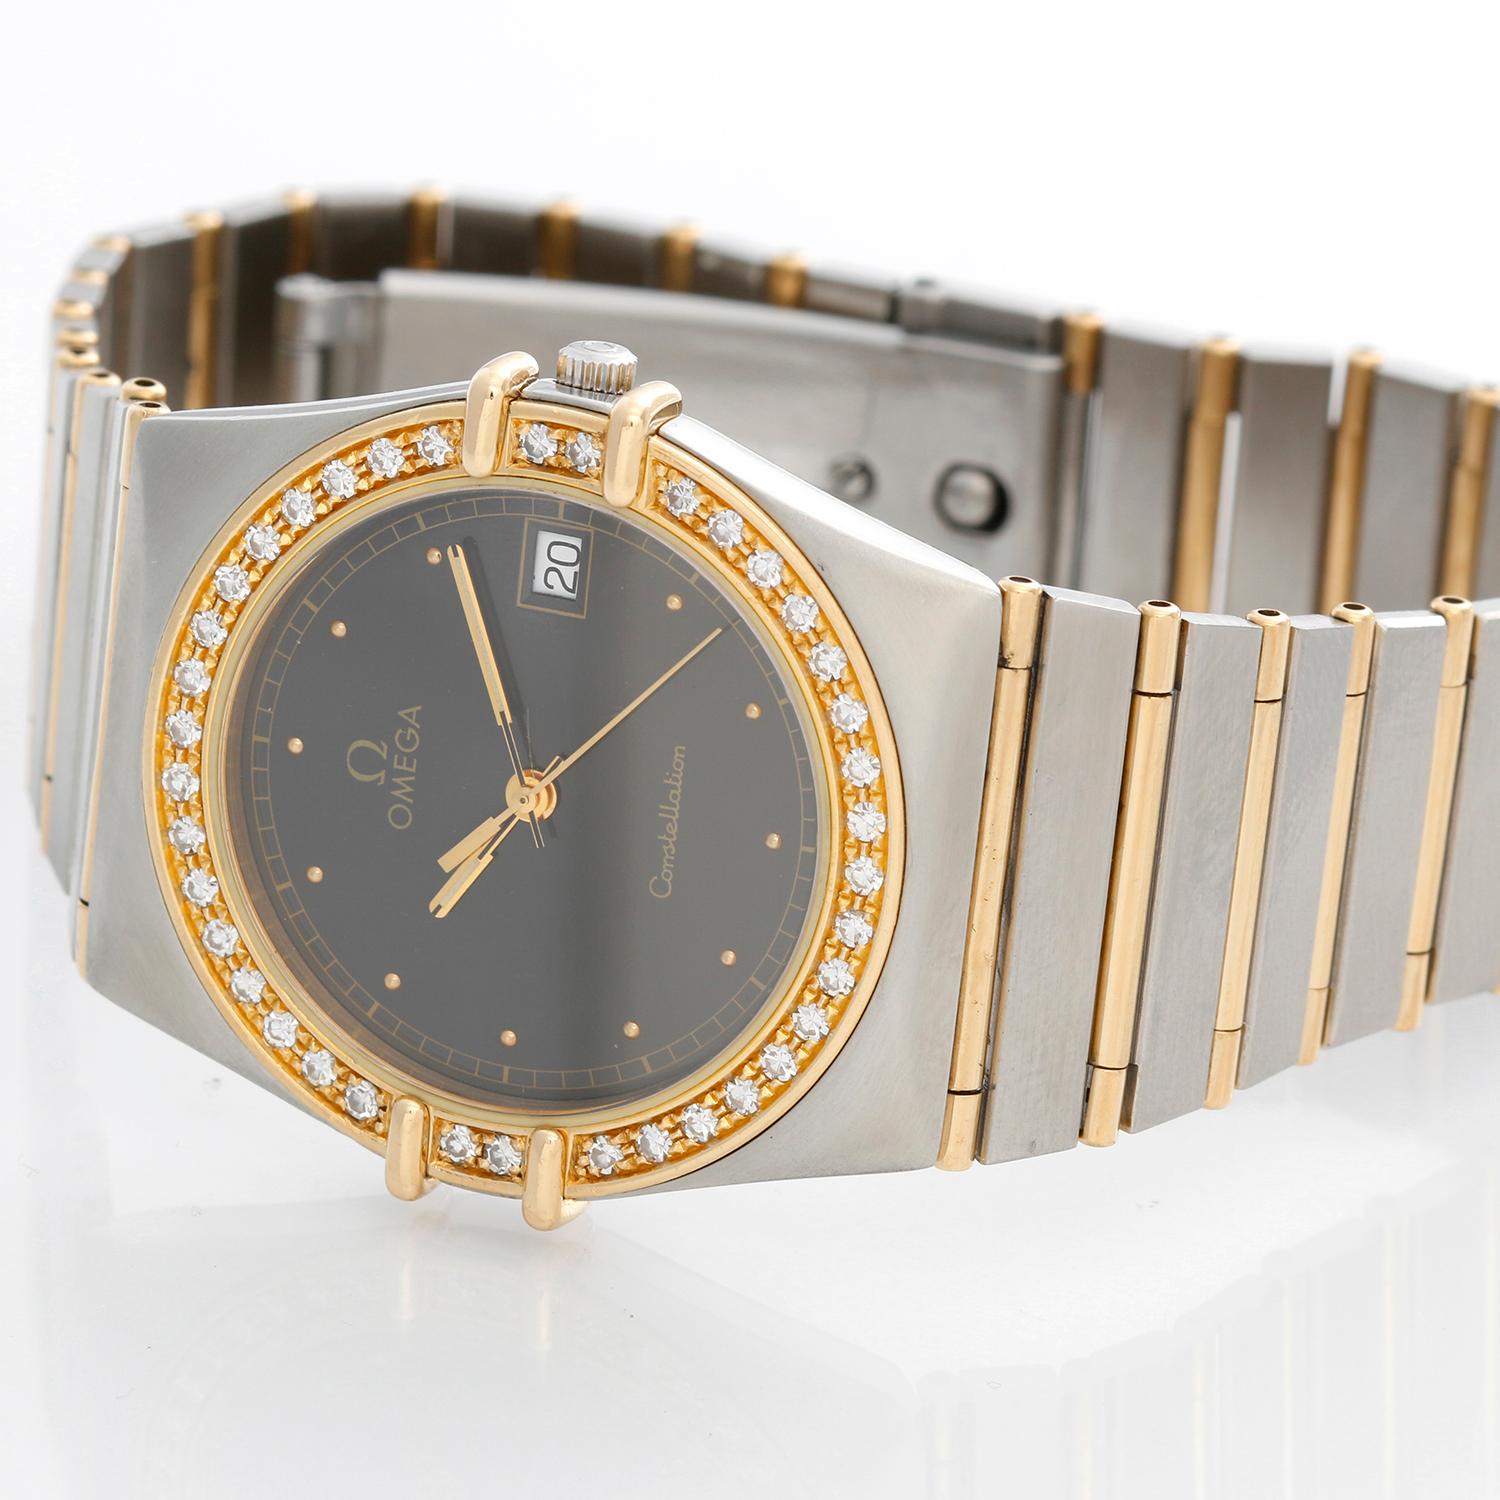 Omega Constellation 2-Tone  Diamond Watch - Quartz. 18K Yellow gold case with a diamond bezel  ( 34 mm ). Black dial with raised stick hour markers. Two tone Omega Constellation bracelet; Will fit up to a 7 3/4 inch wrist . Pre-owned with Omega box